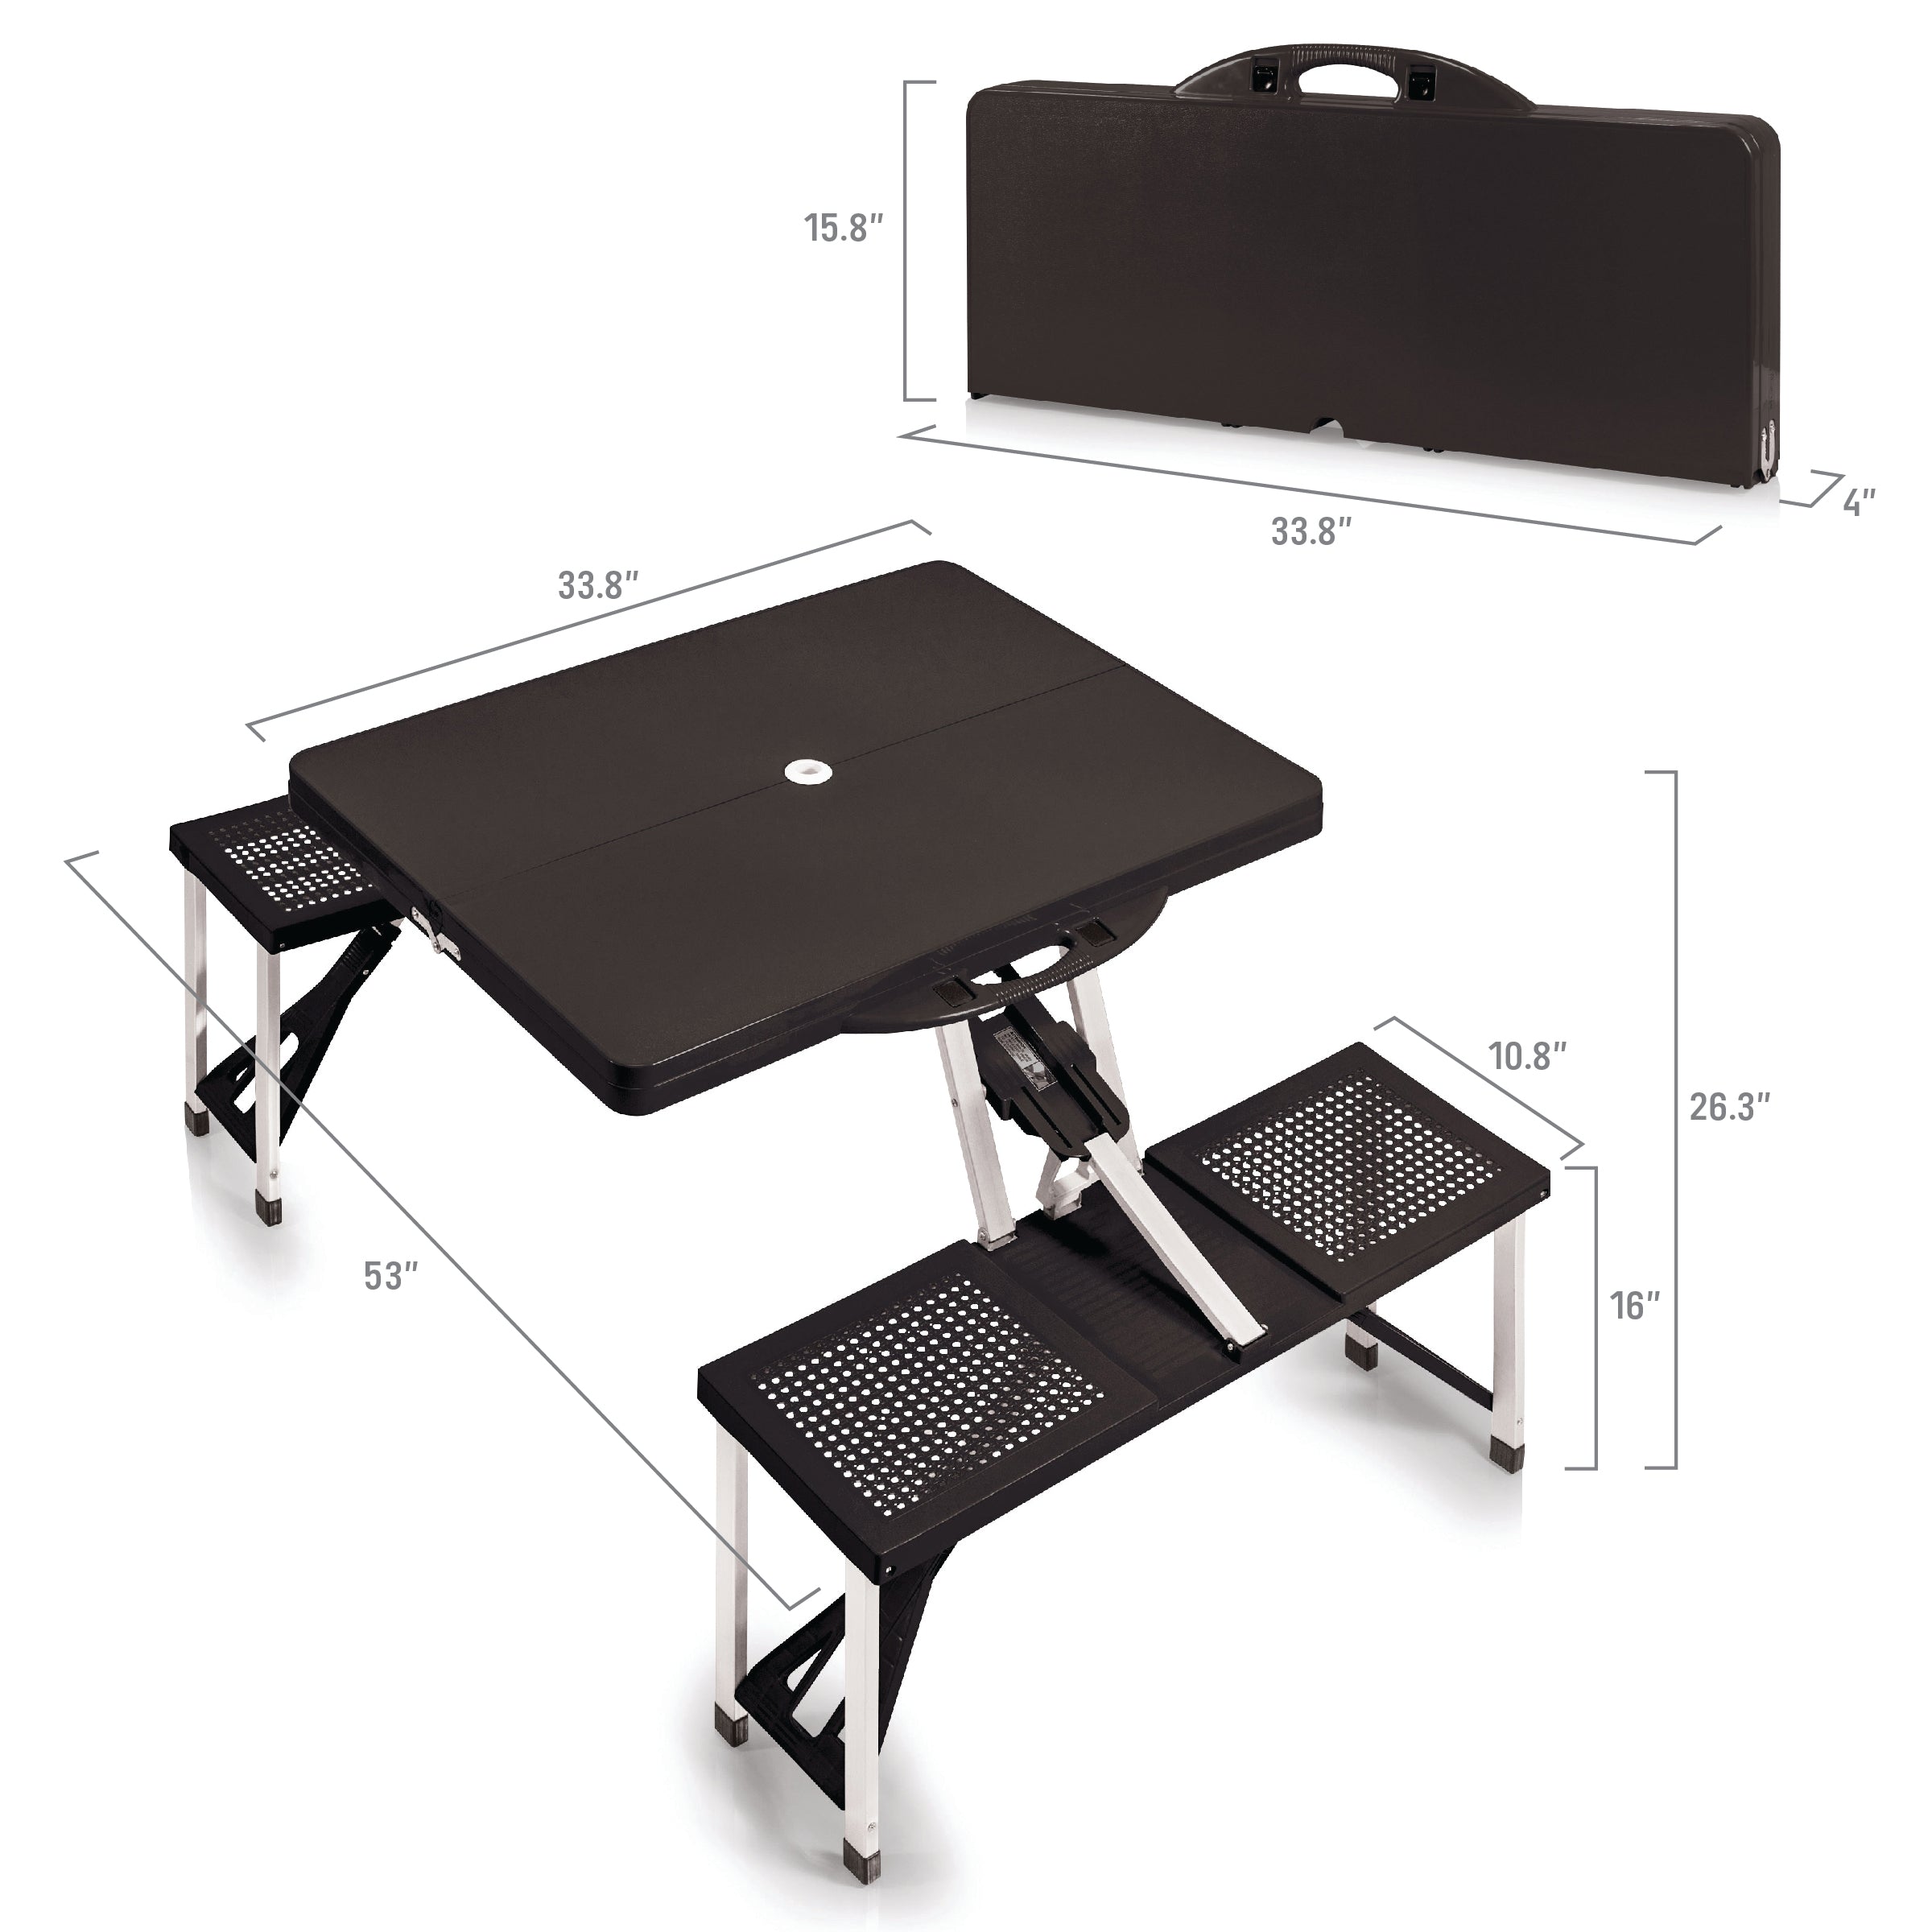 Hockey Rink - Colorado Avalanche - Picnic Table Portable Folding Table with Seats